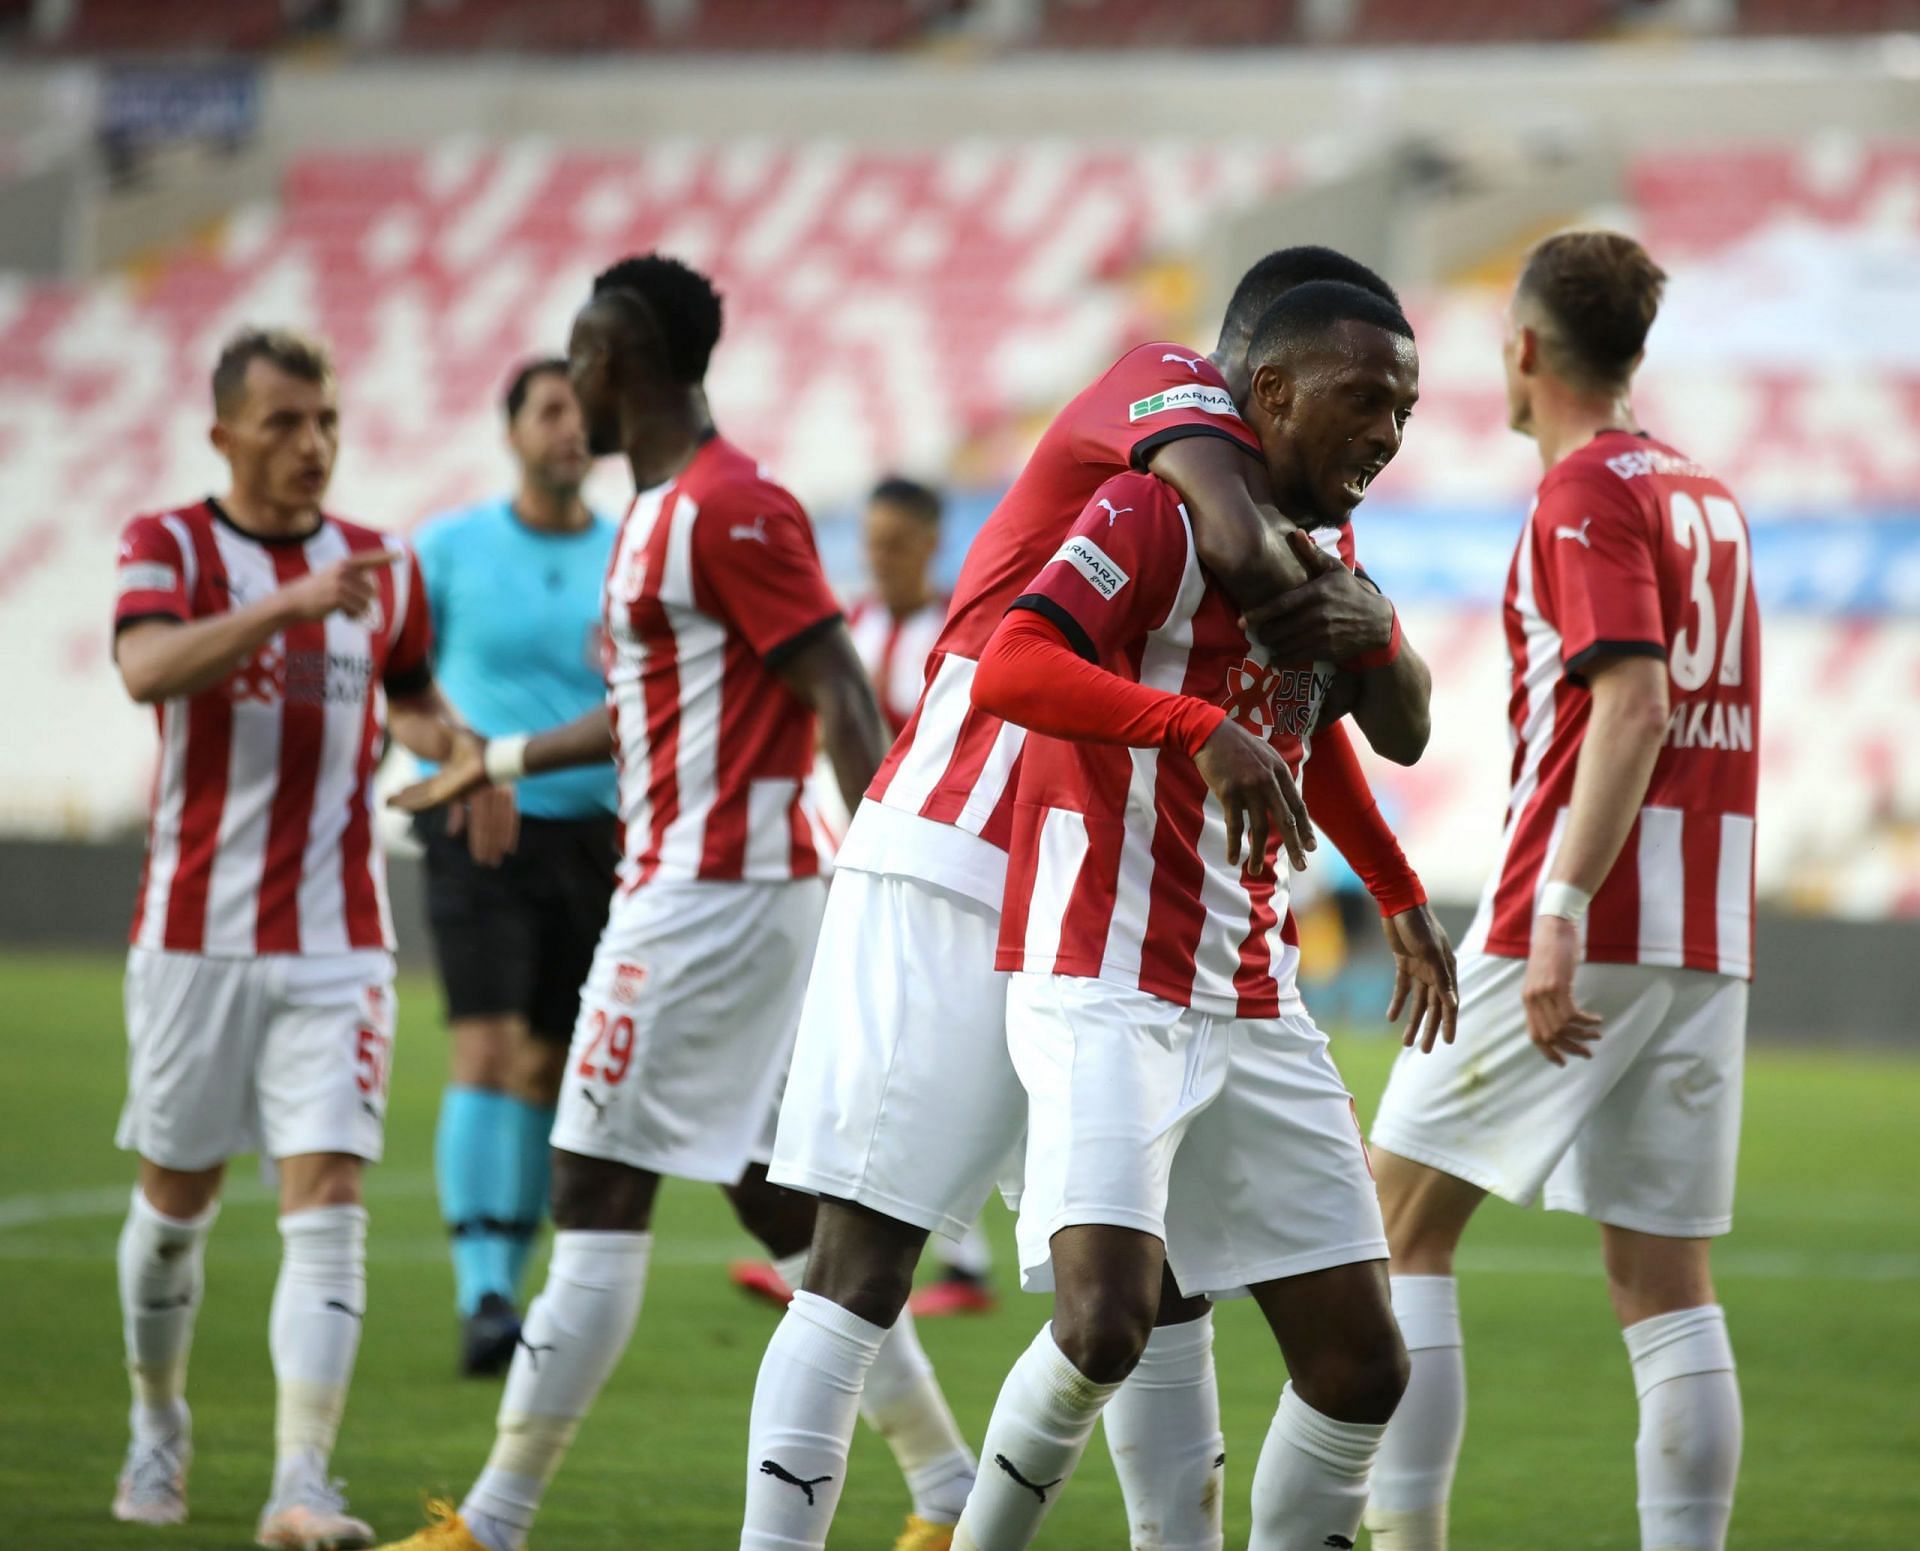 Sivasspor are looking to win their group